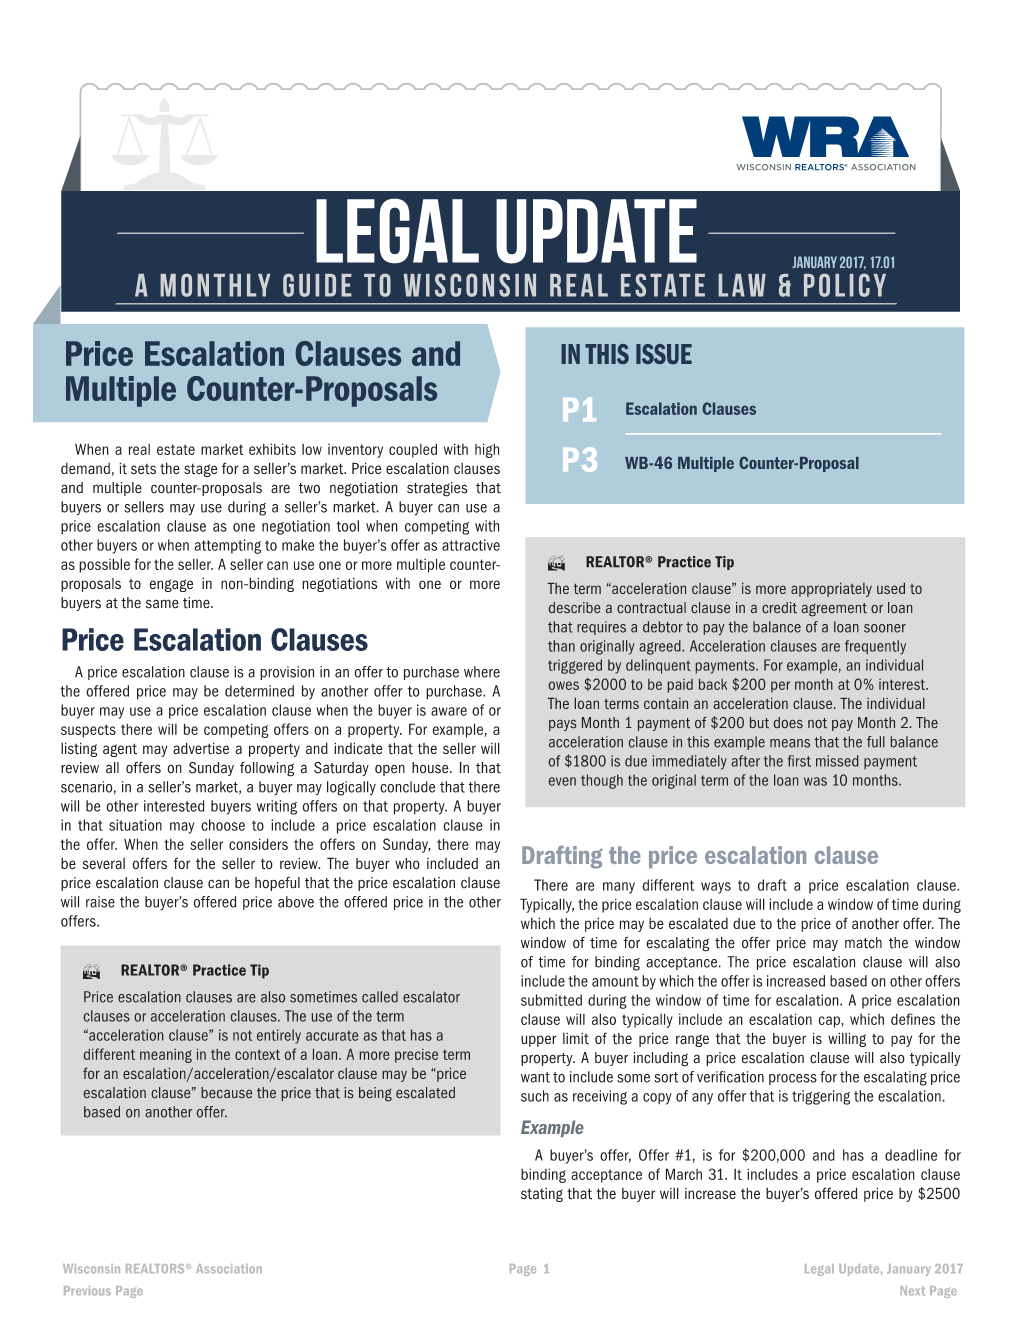 Price Escalation Clauses and Multiple Counter-Proposals